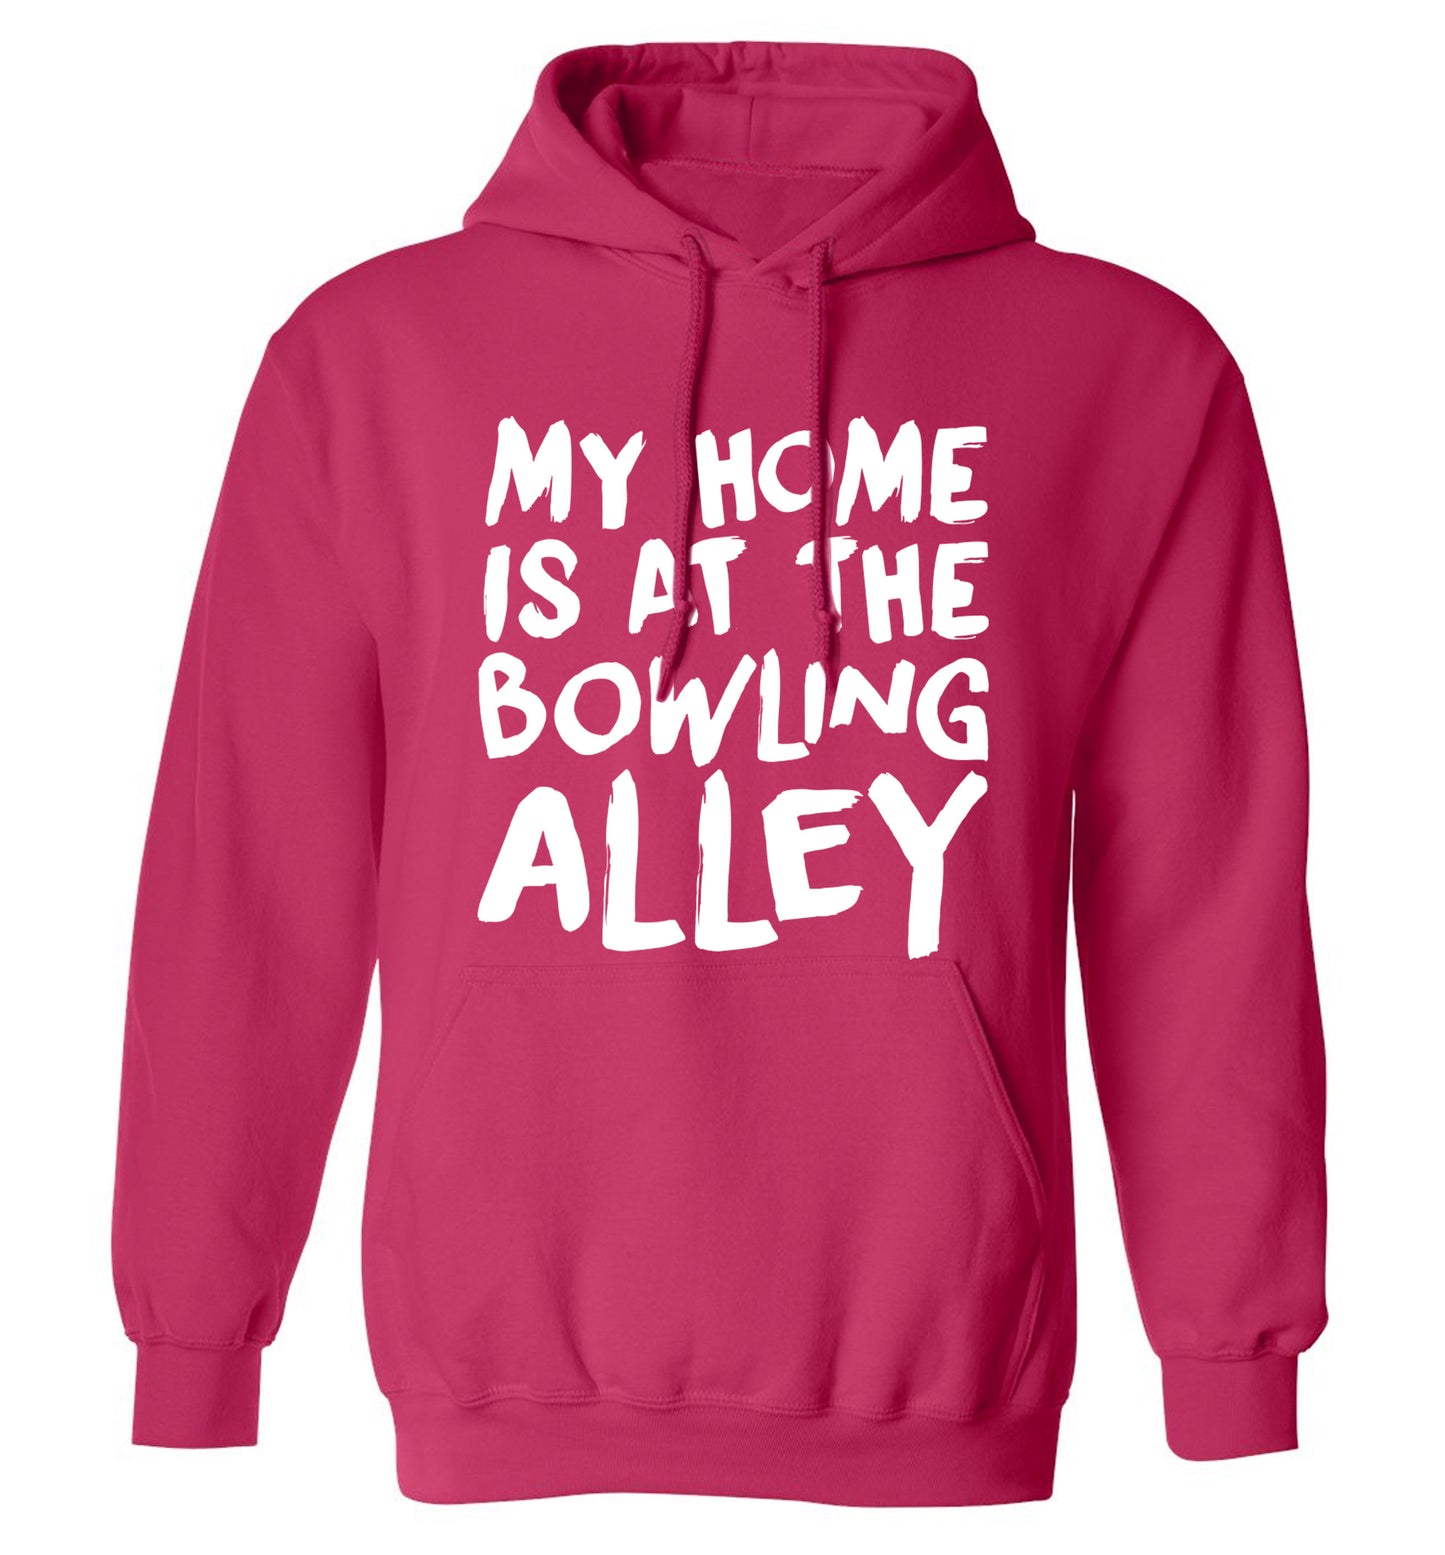 My home is at the bowling alley adults unisex pink hoodie 2XL